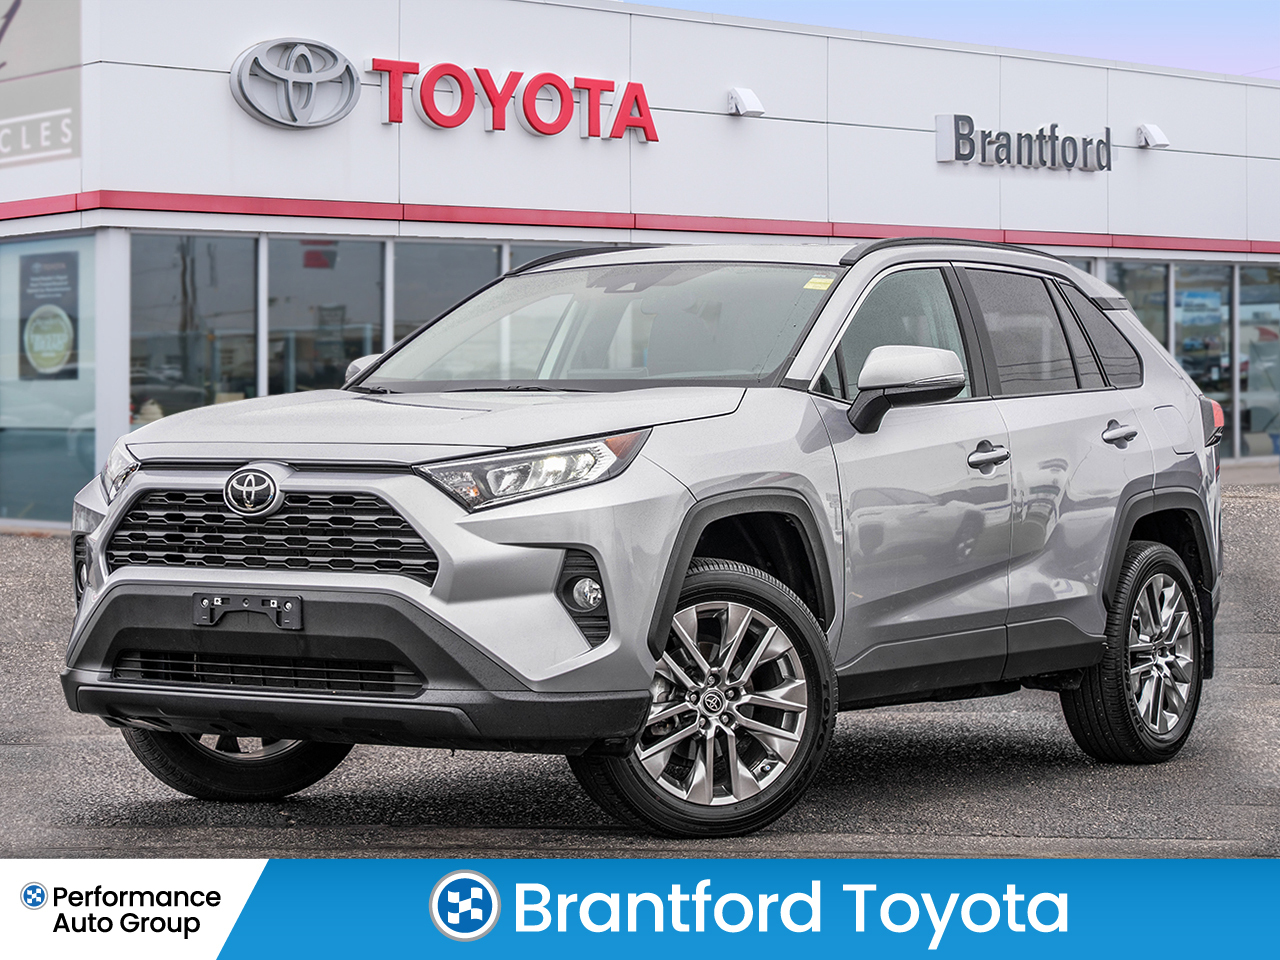 2021 Toyota RAV4 XLE AWD with Premium package upgrade 